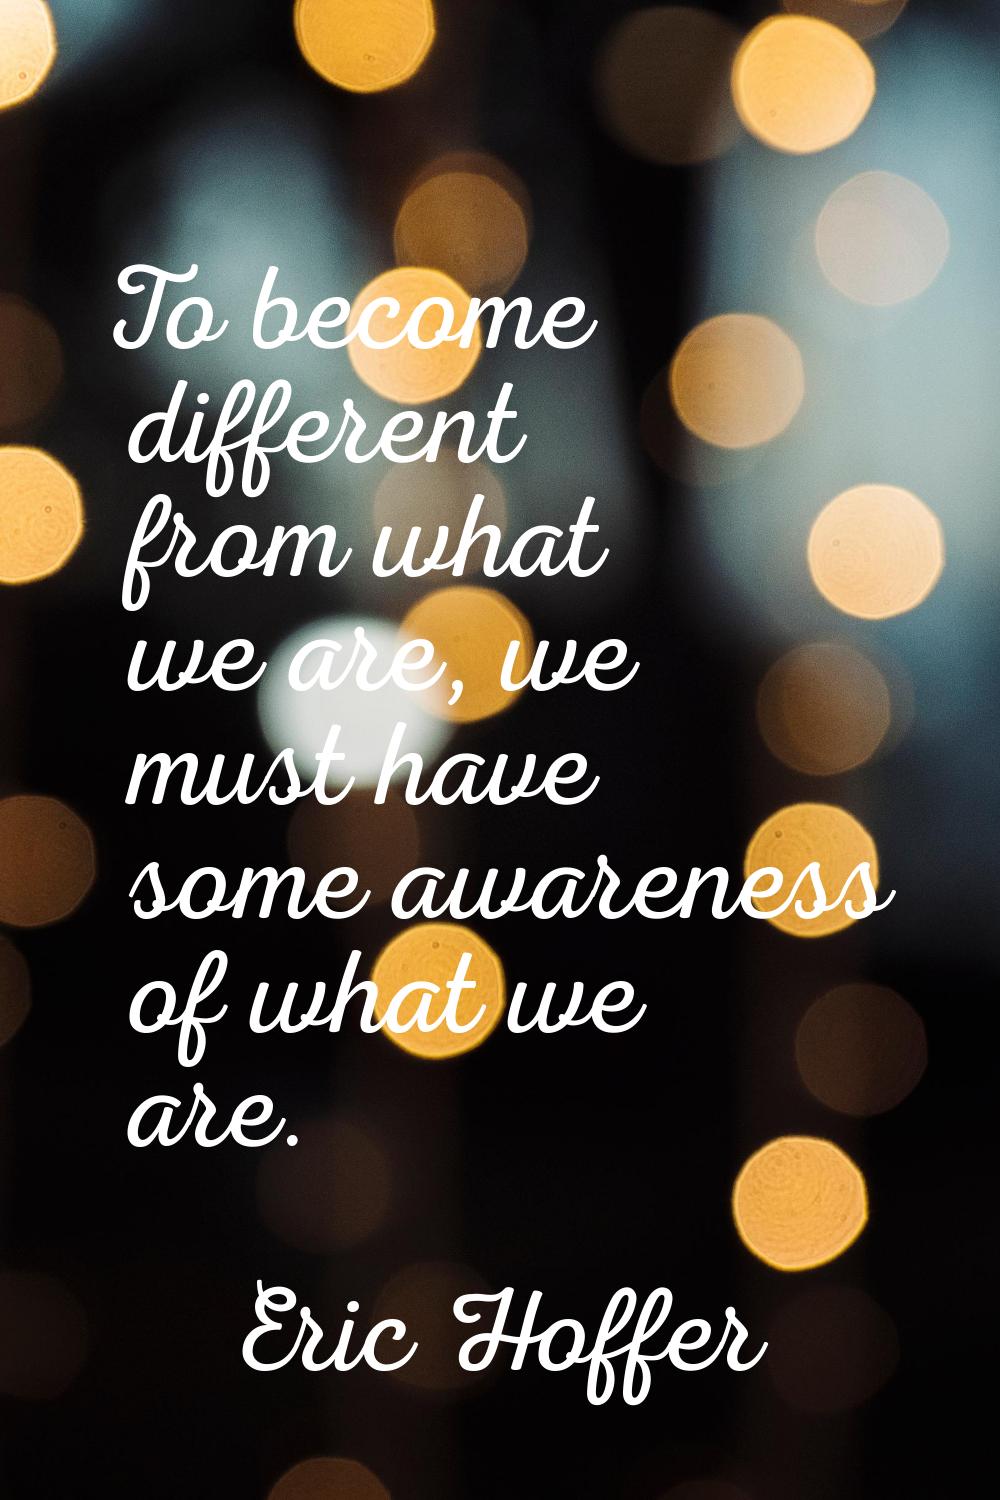 To become different from what we are, we must have some awareness of what we are.